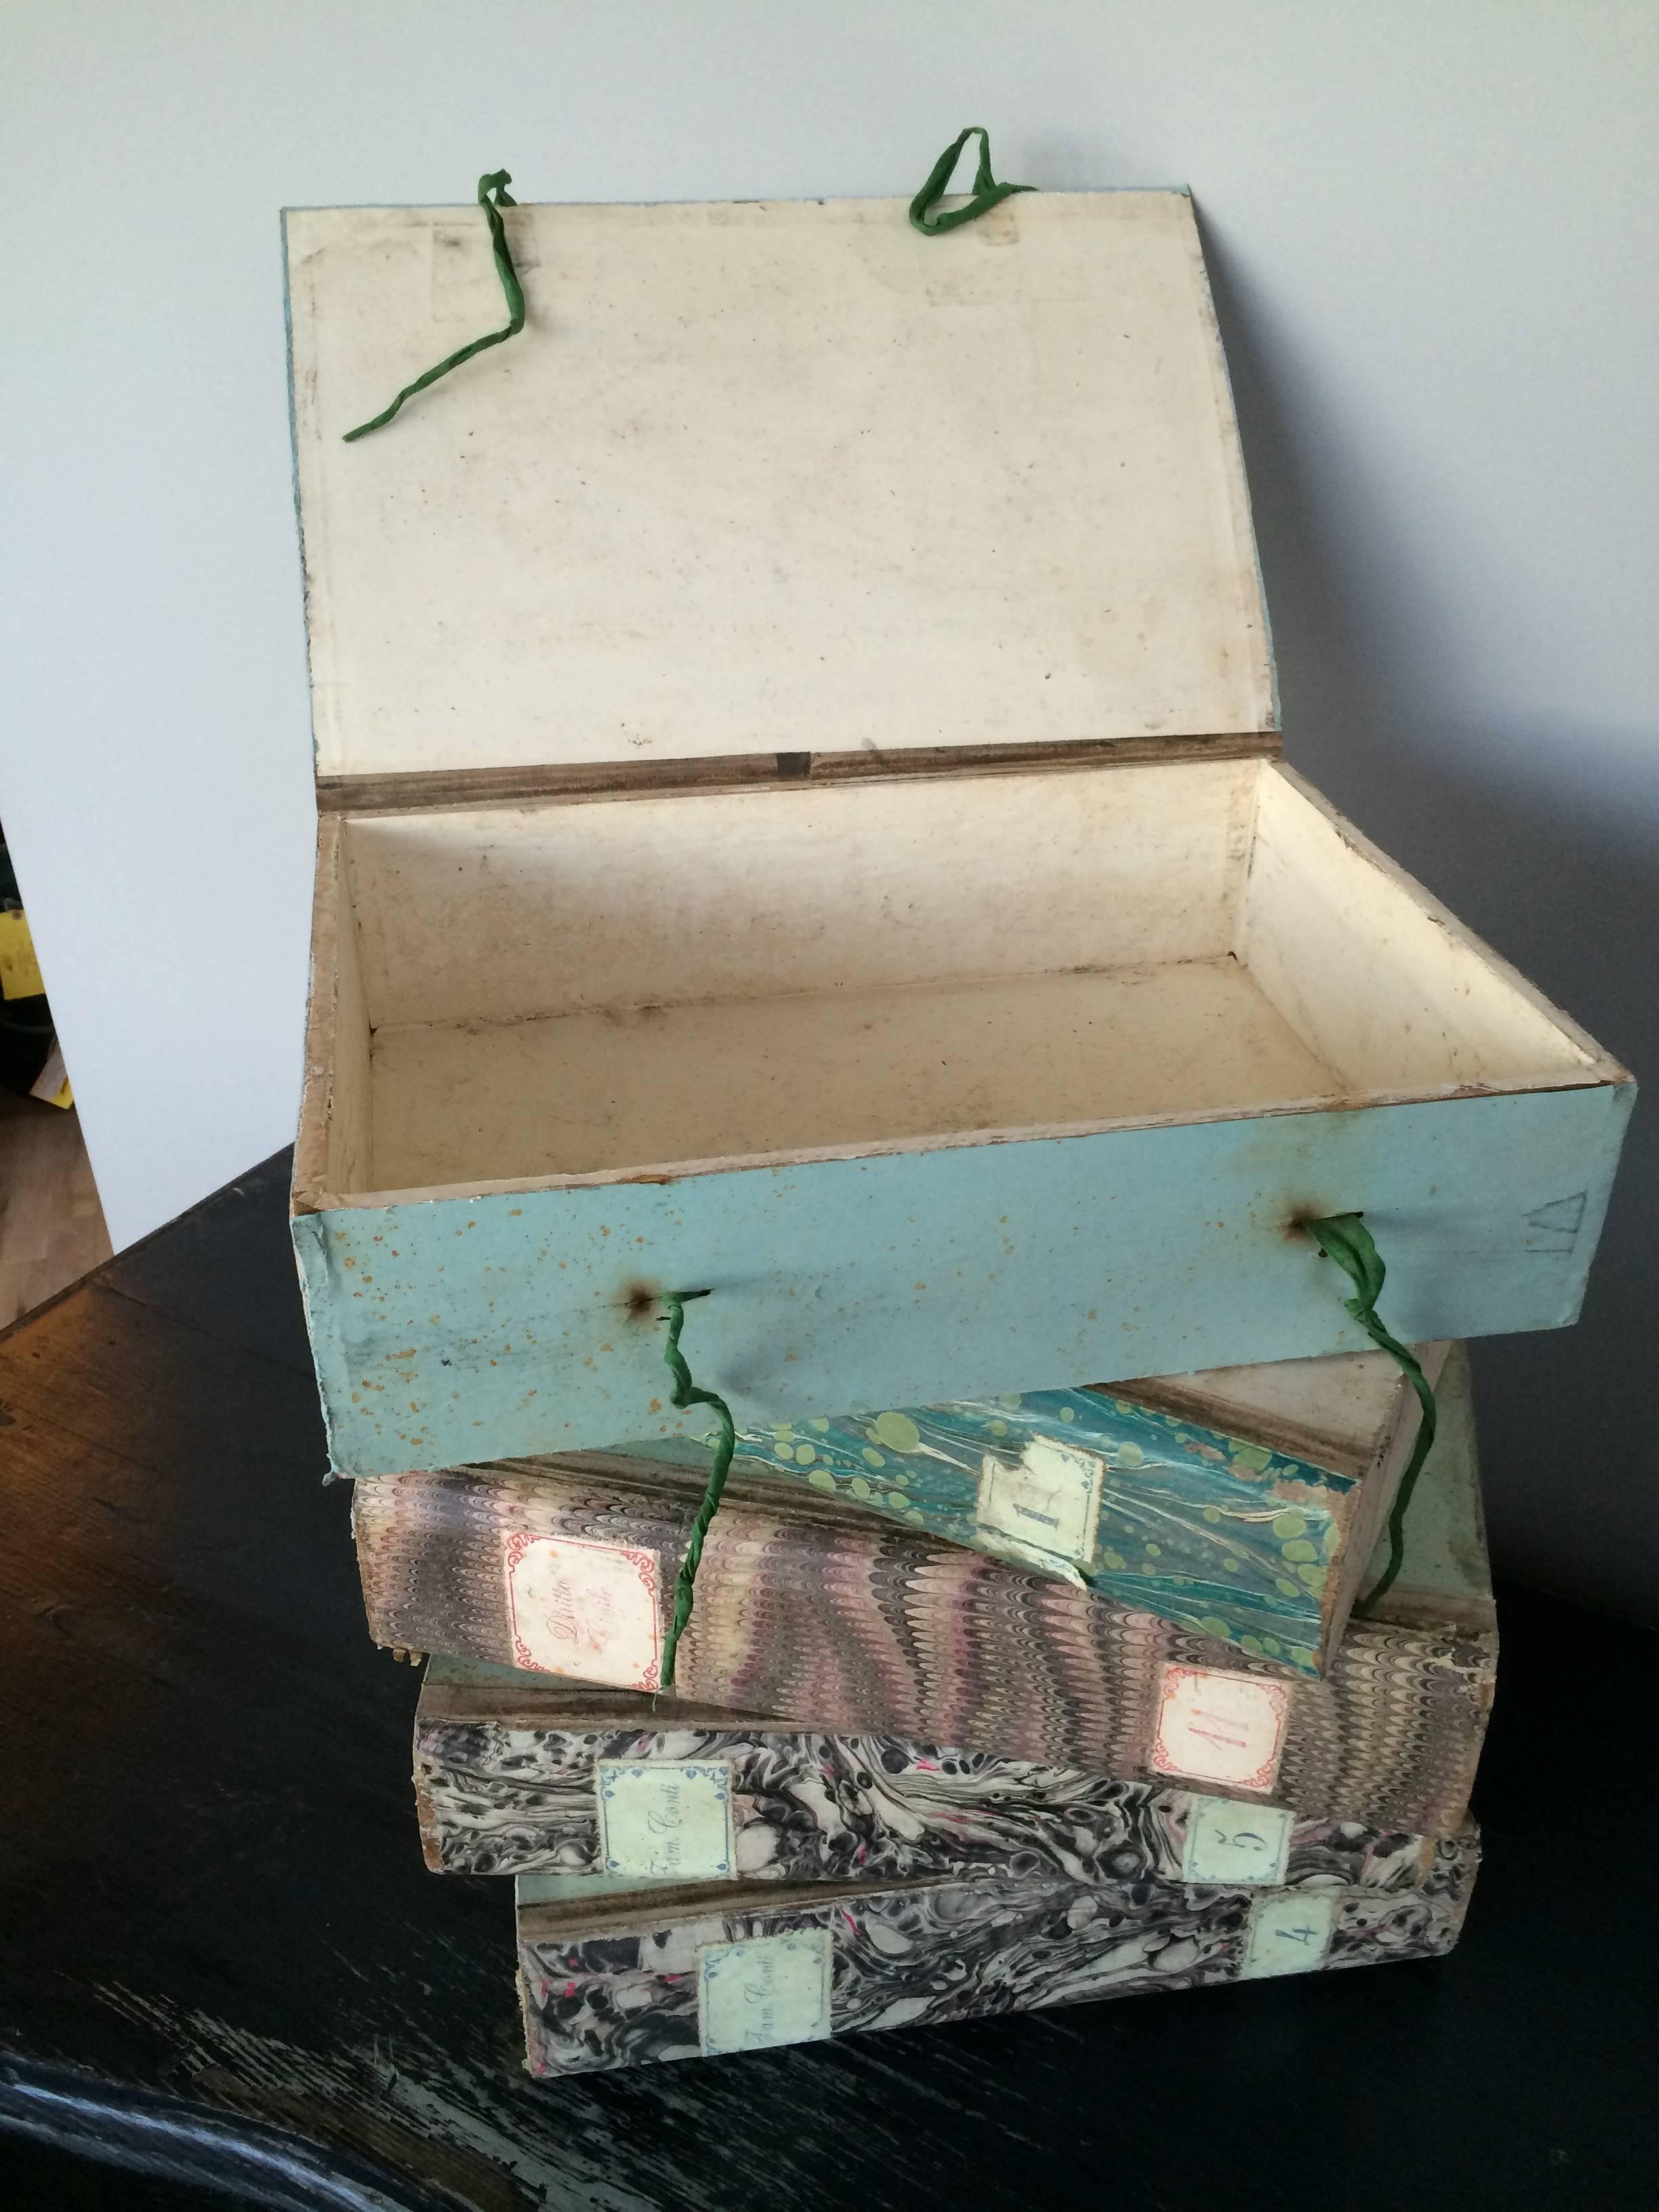 Italian document boxes in colorful marbled paper on board with tie ribbons, used by families to organize family documents. From Bologna, Italy, circa 1920. 10 boxes available. Price is per box.